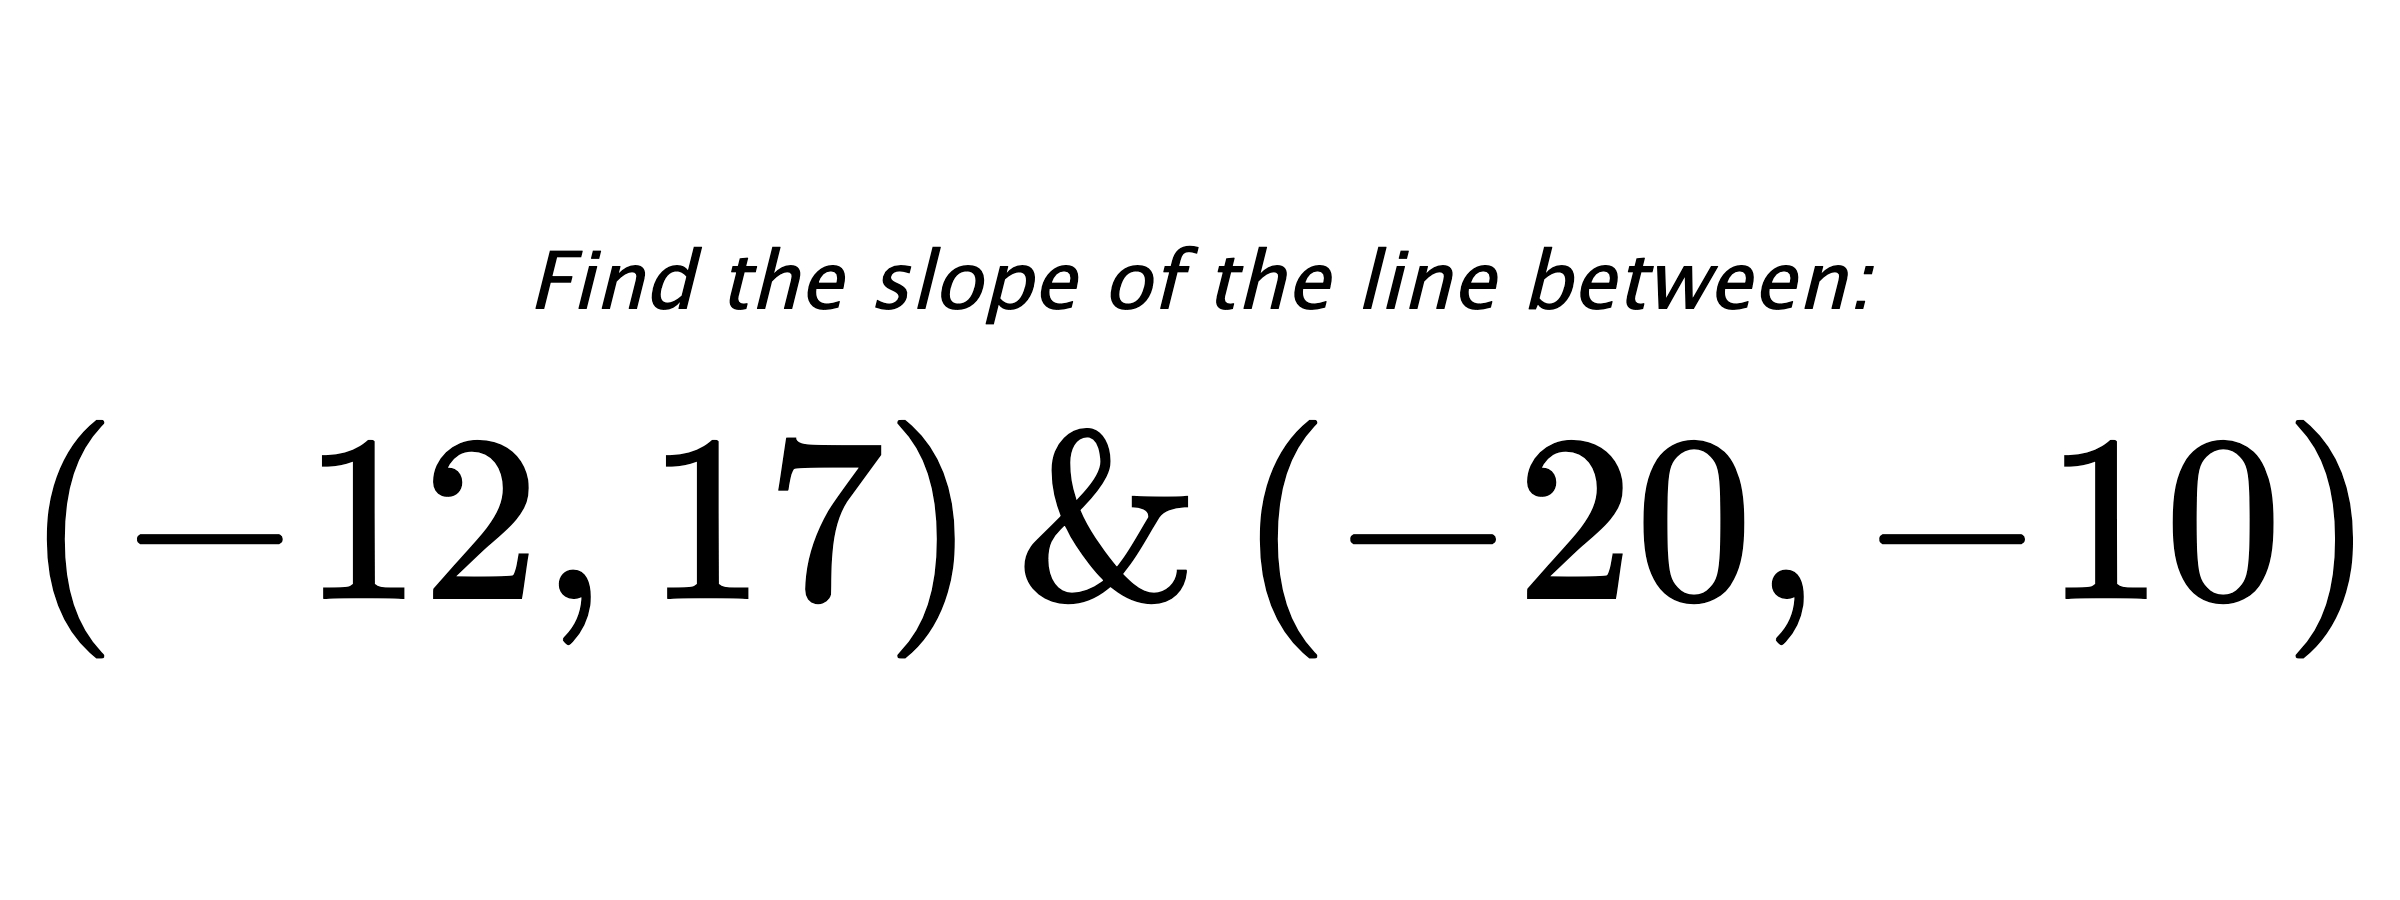 Find the slope of the line between: $ (-12,17) \hspace{0.5cm} \text{&} \hspace{0.5cm} (-20,-10) $